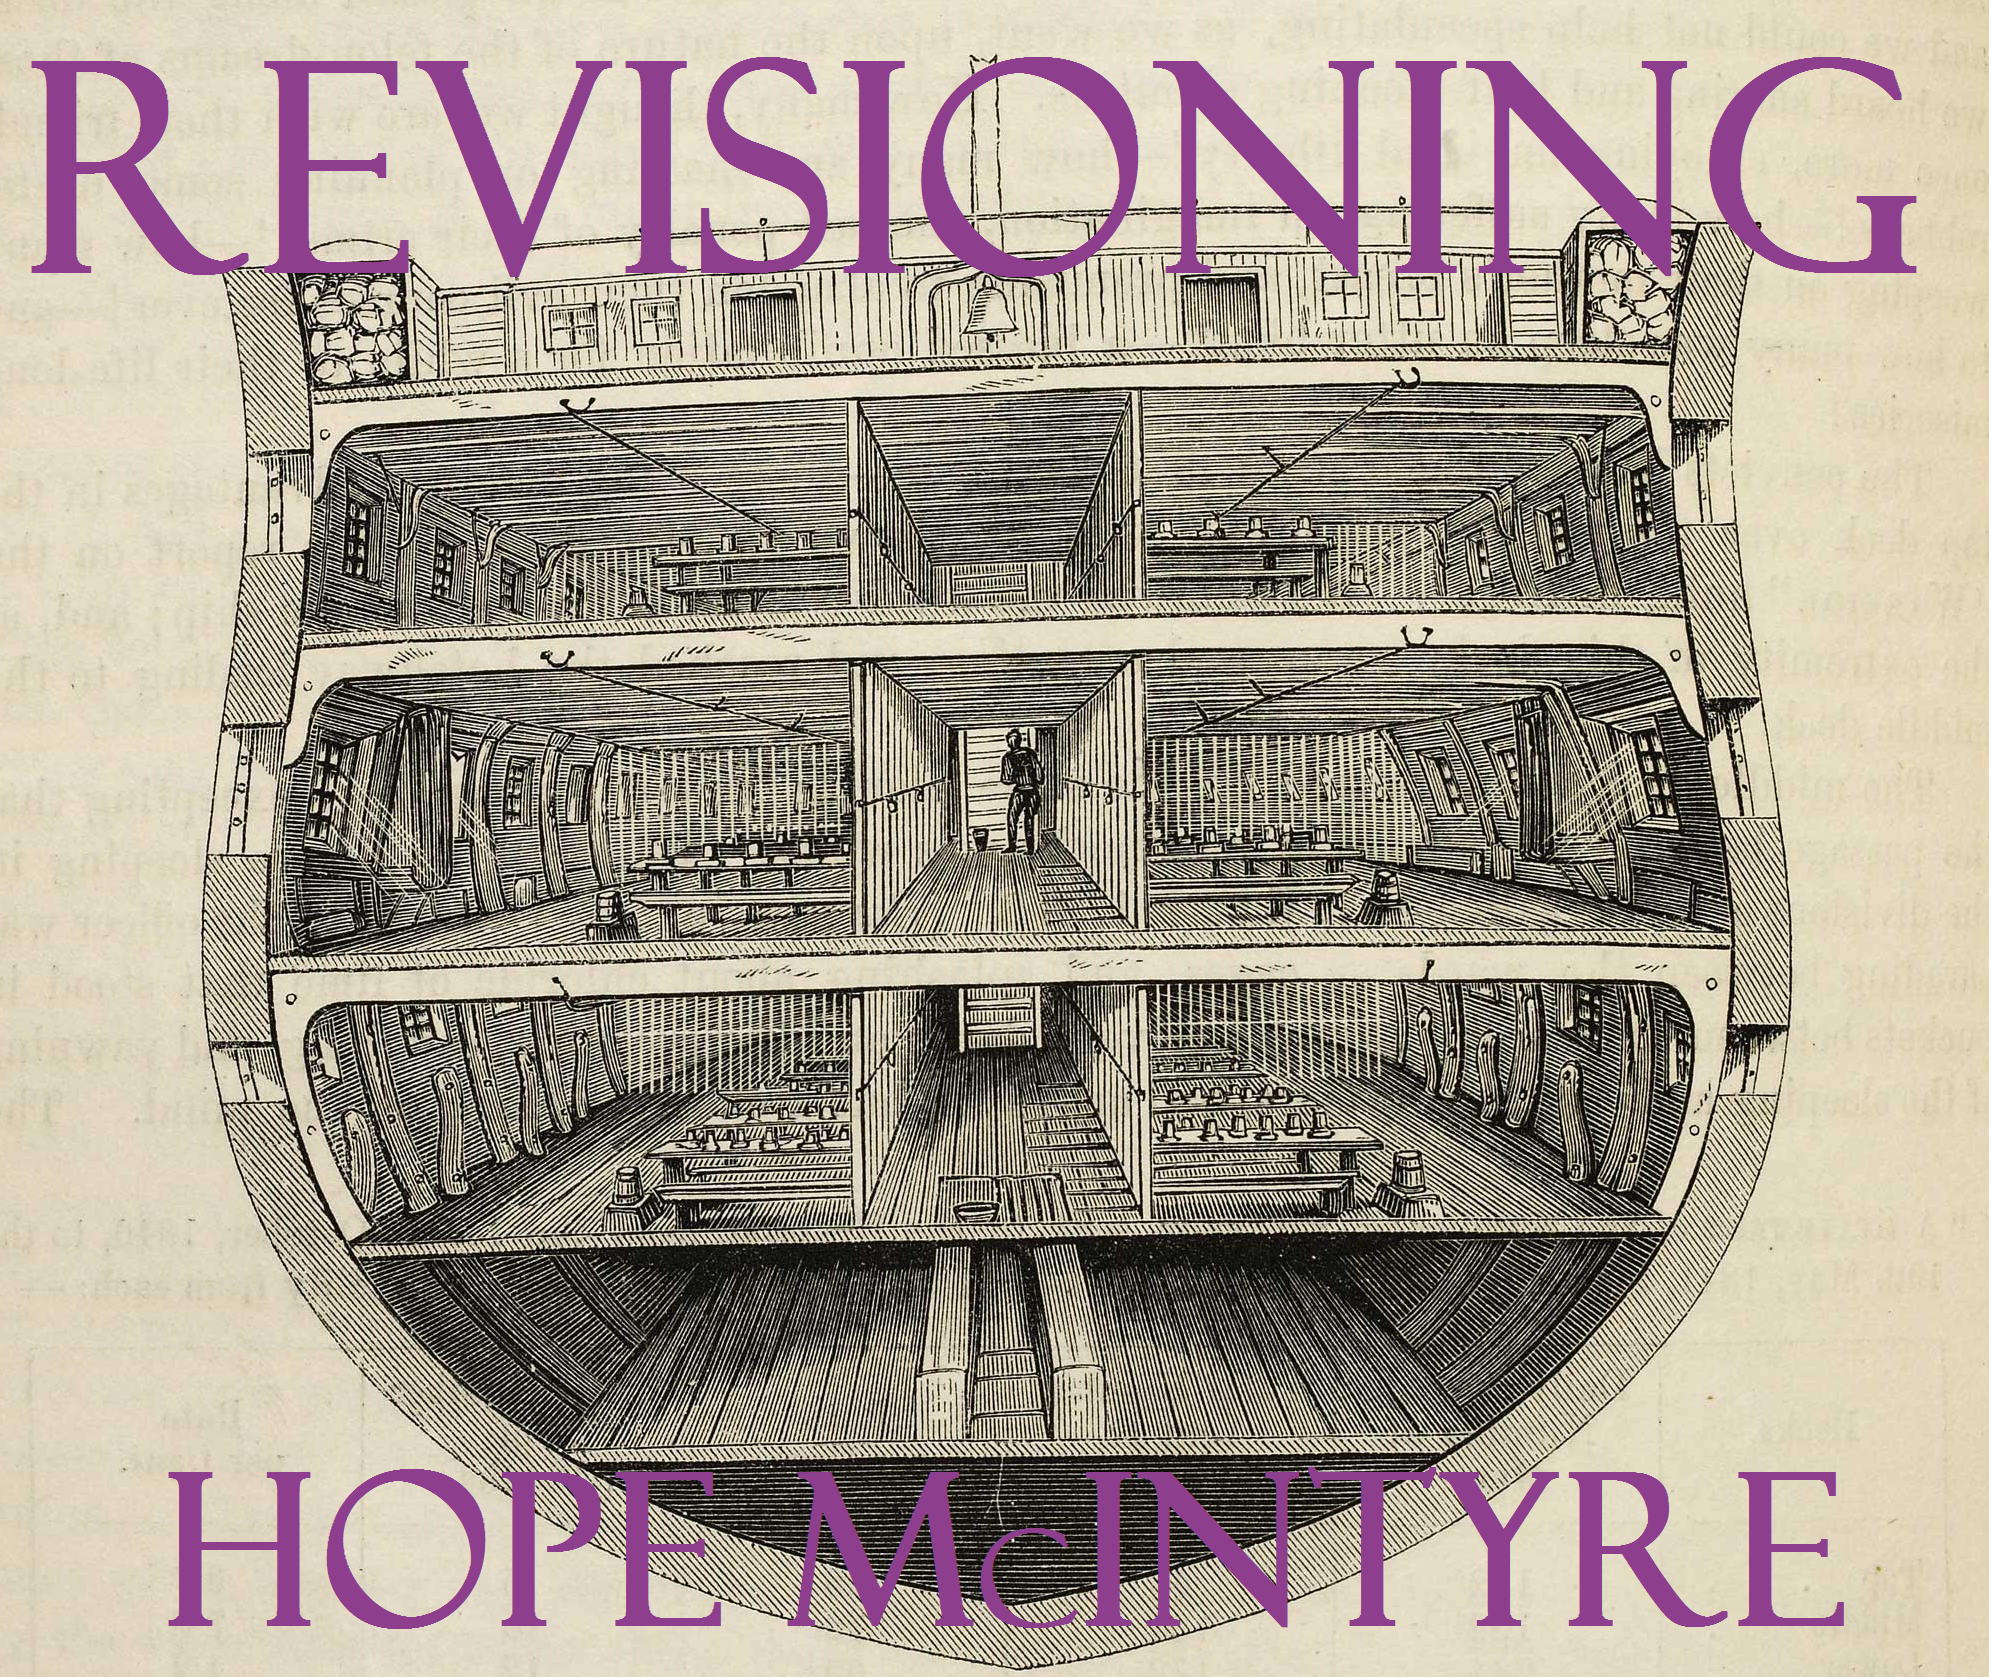 REVISIONING - A ONE-ACT PLAY BY HOPE
                        MCINTYRE